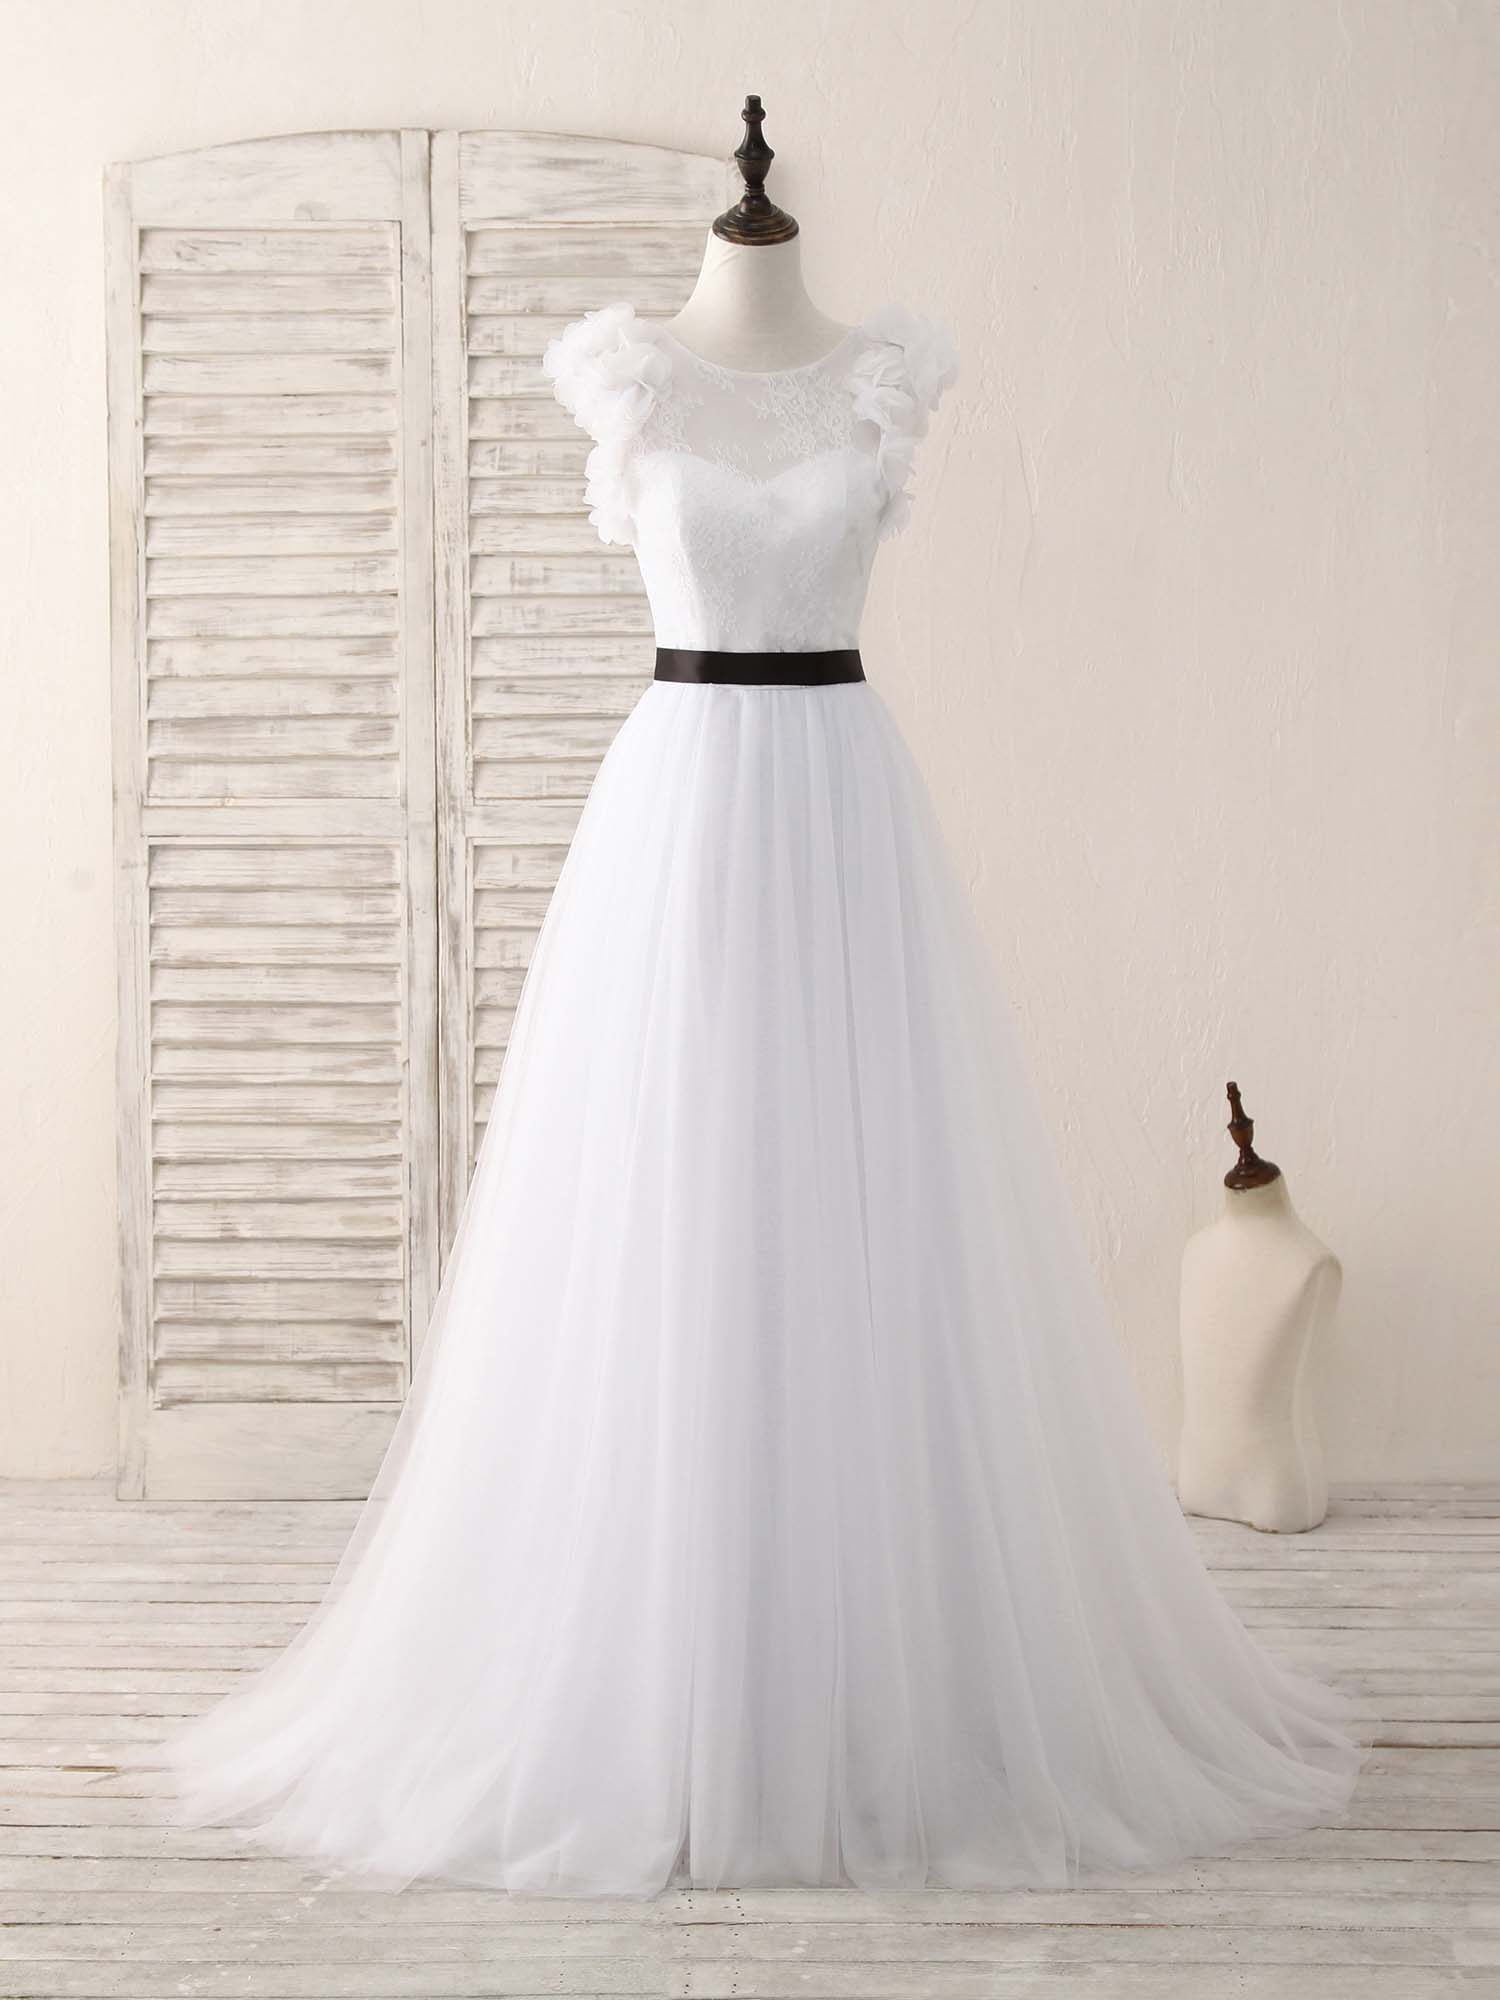 White A-Line Lace Tulle Long Corset Prom Dress, White Evening Dress outfit, Prom Dress 2036